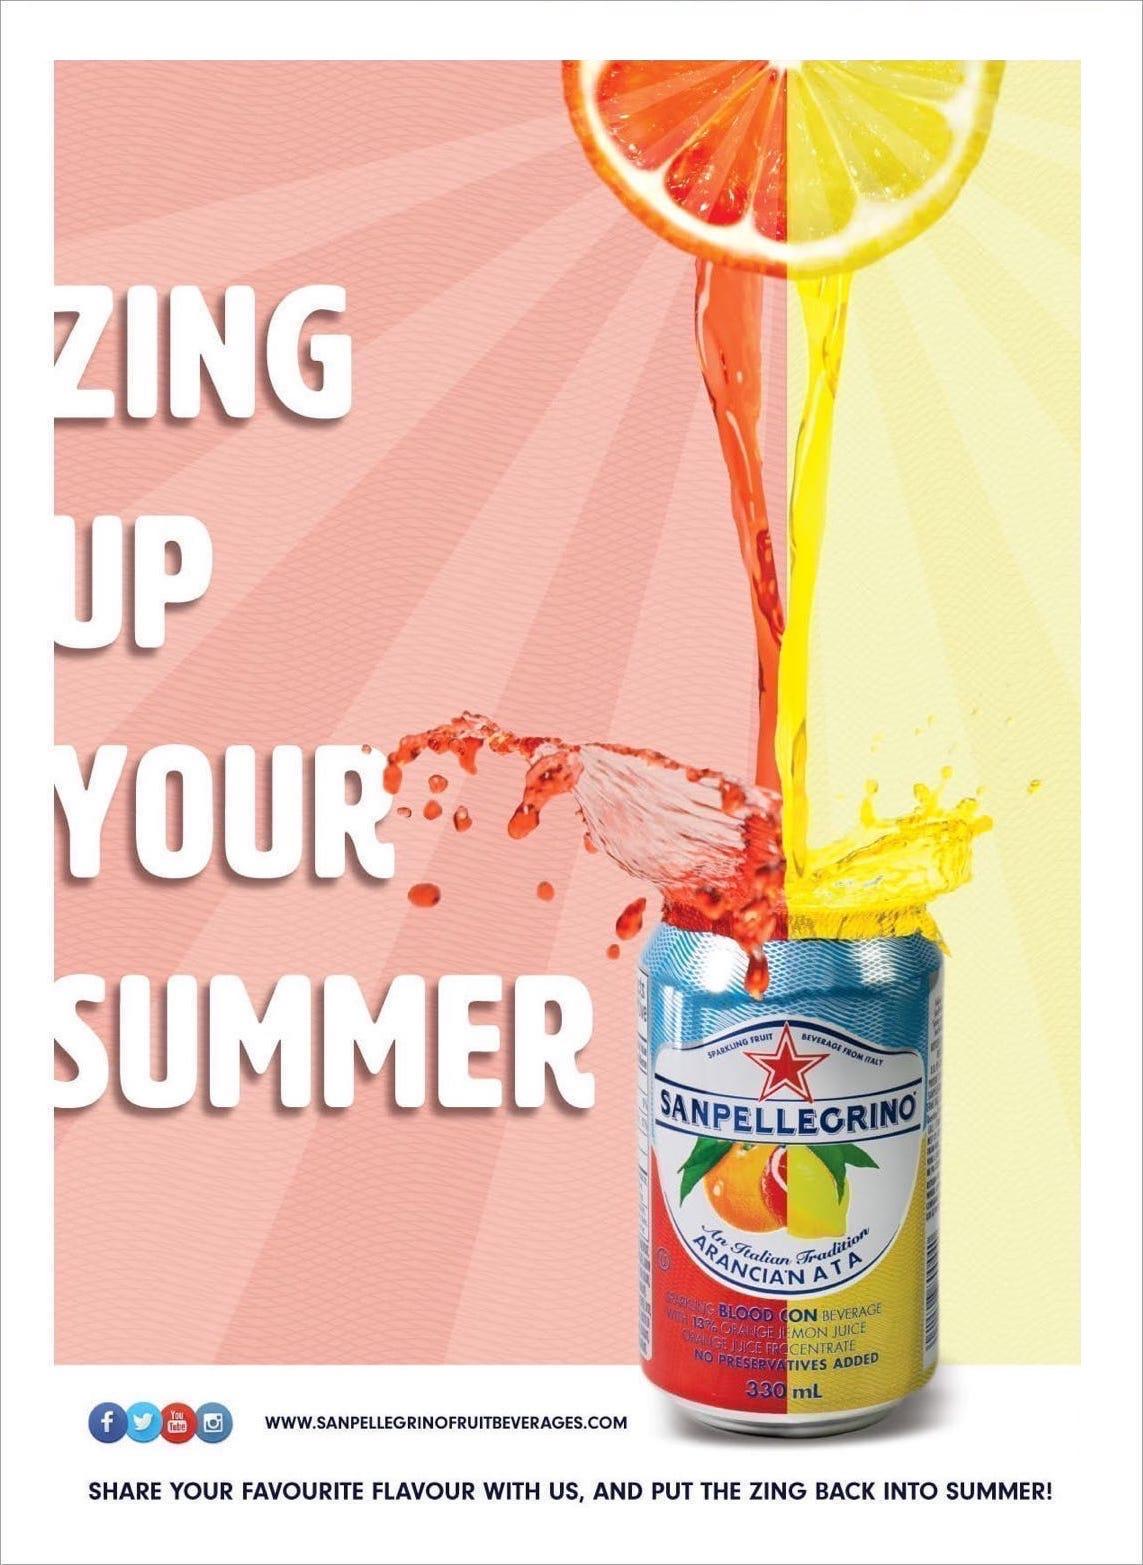 San Pellegrino with red and yellow liquids being pored into it with zing up your summer written